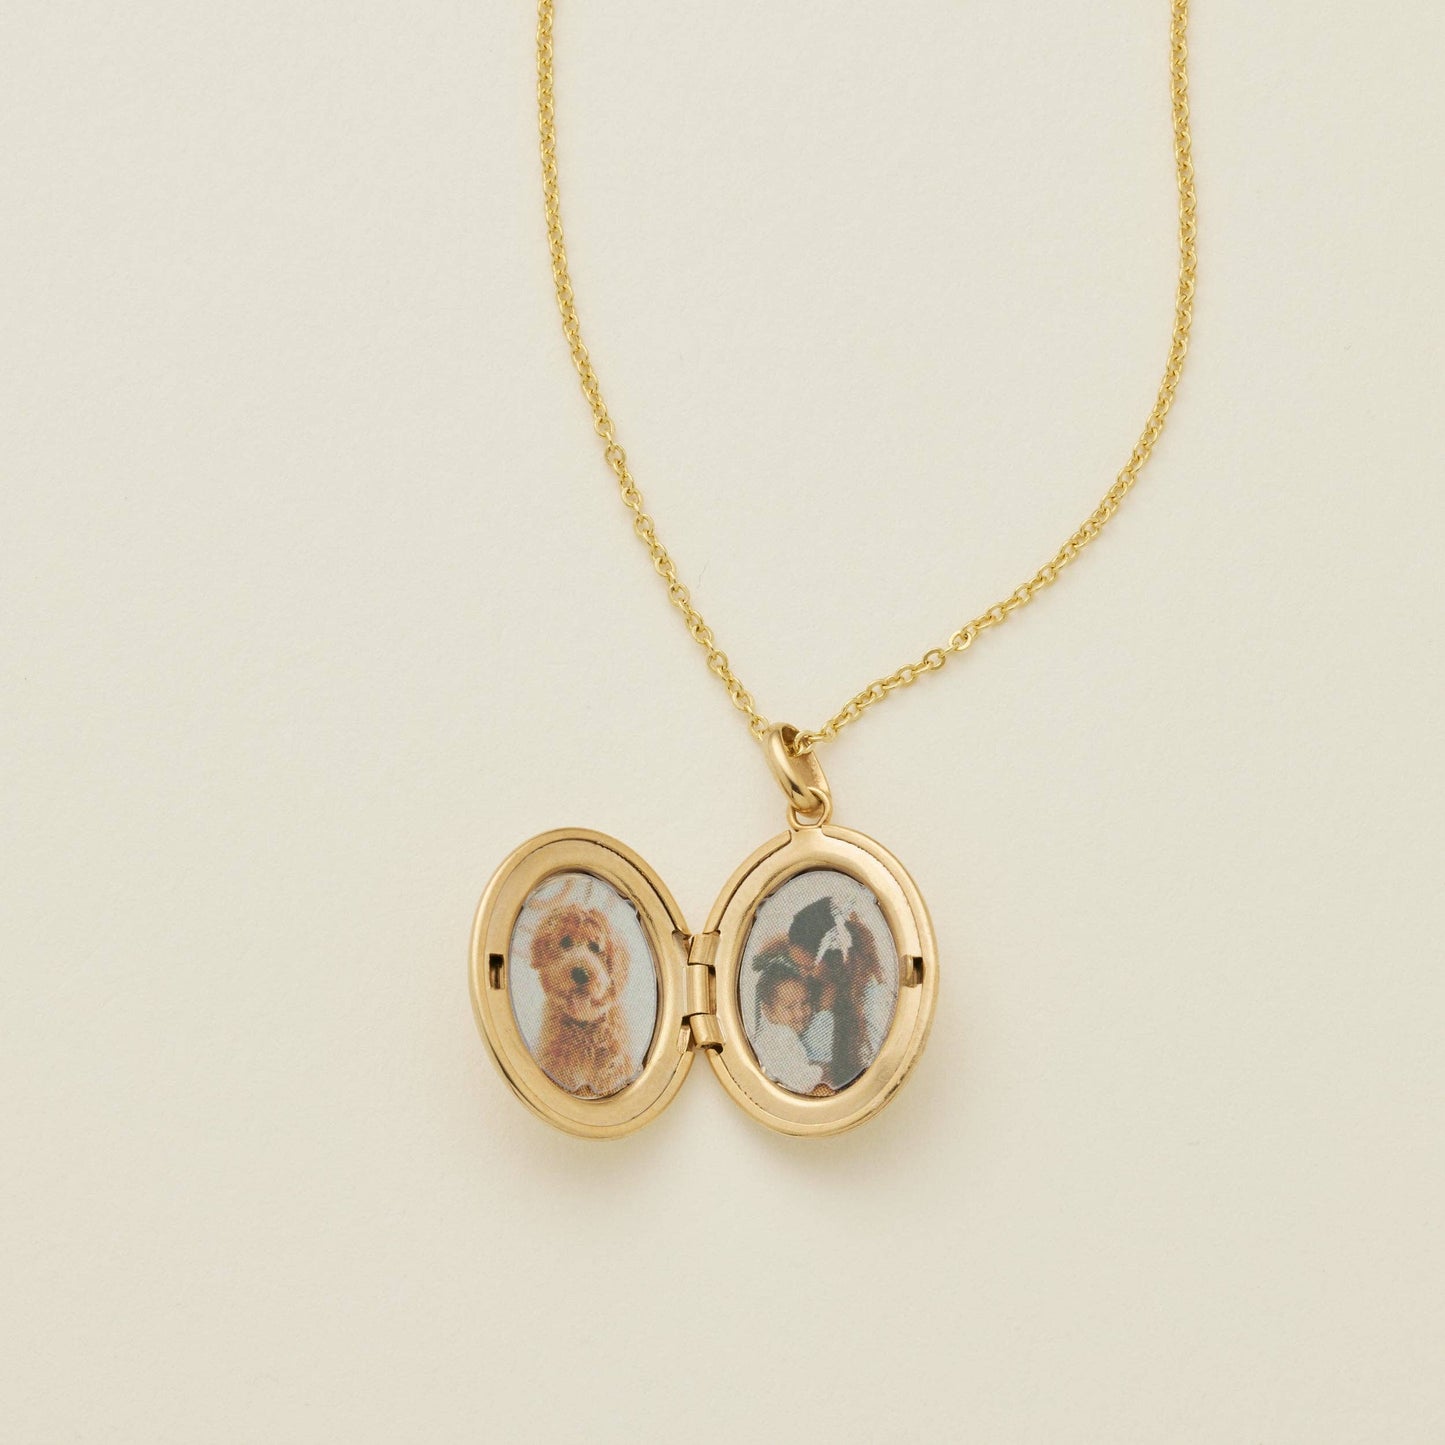 Mini Oval Locket Necklace: Gold Filled / 20"-22"